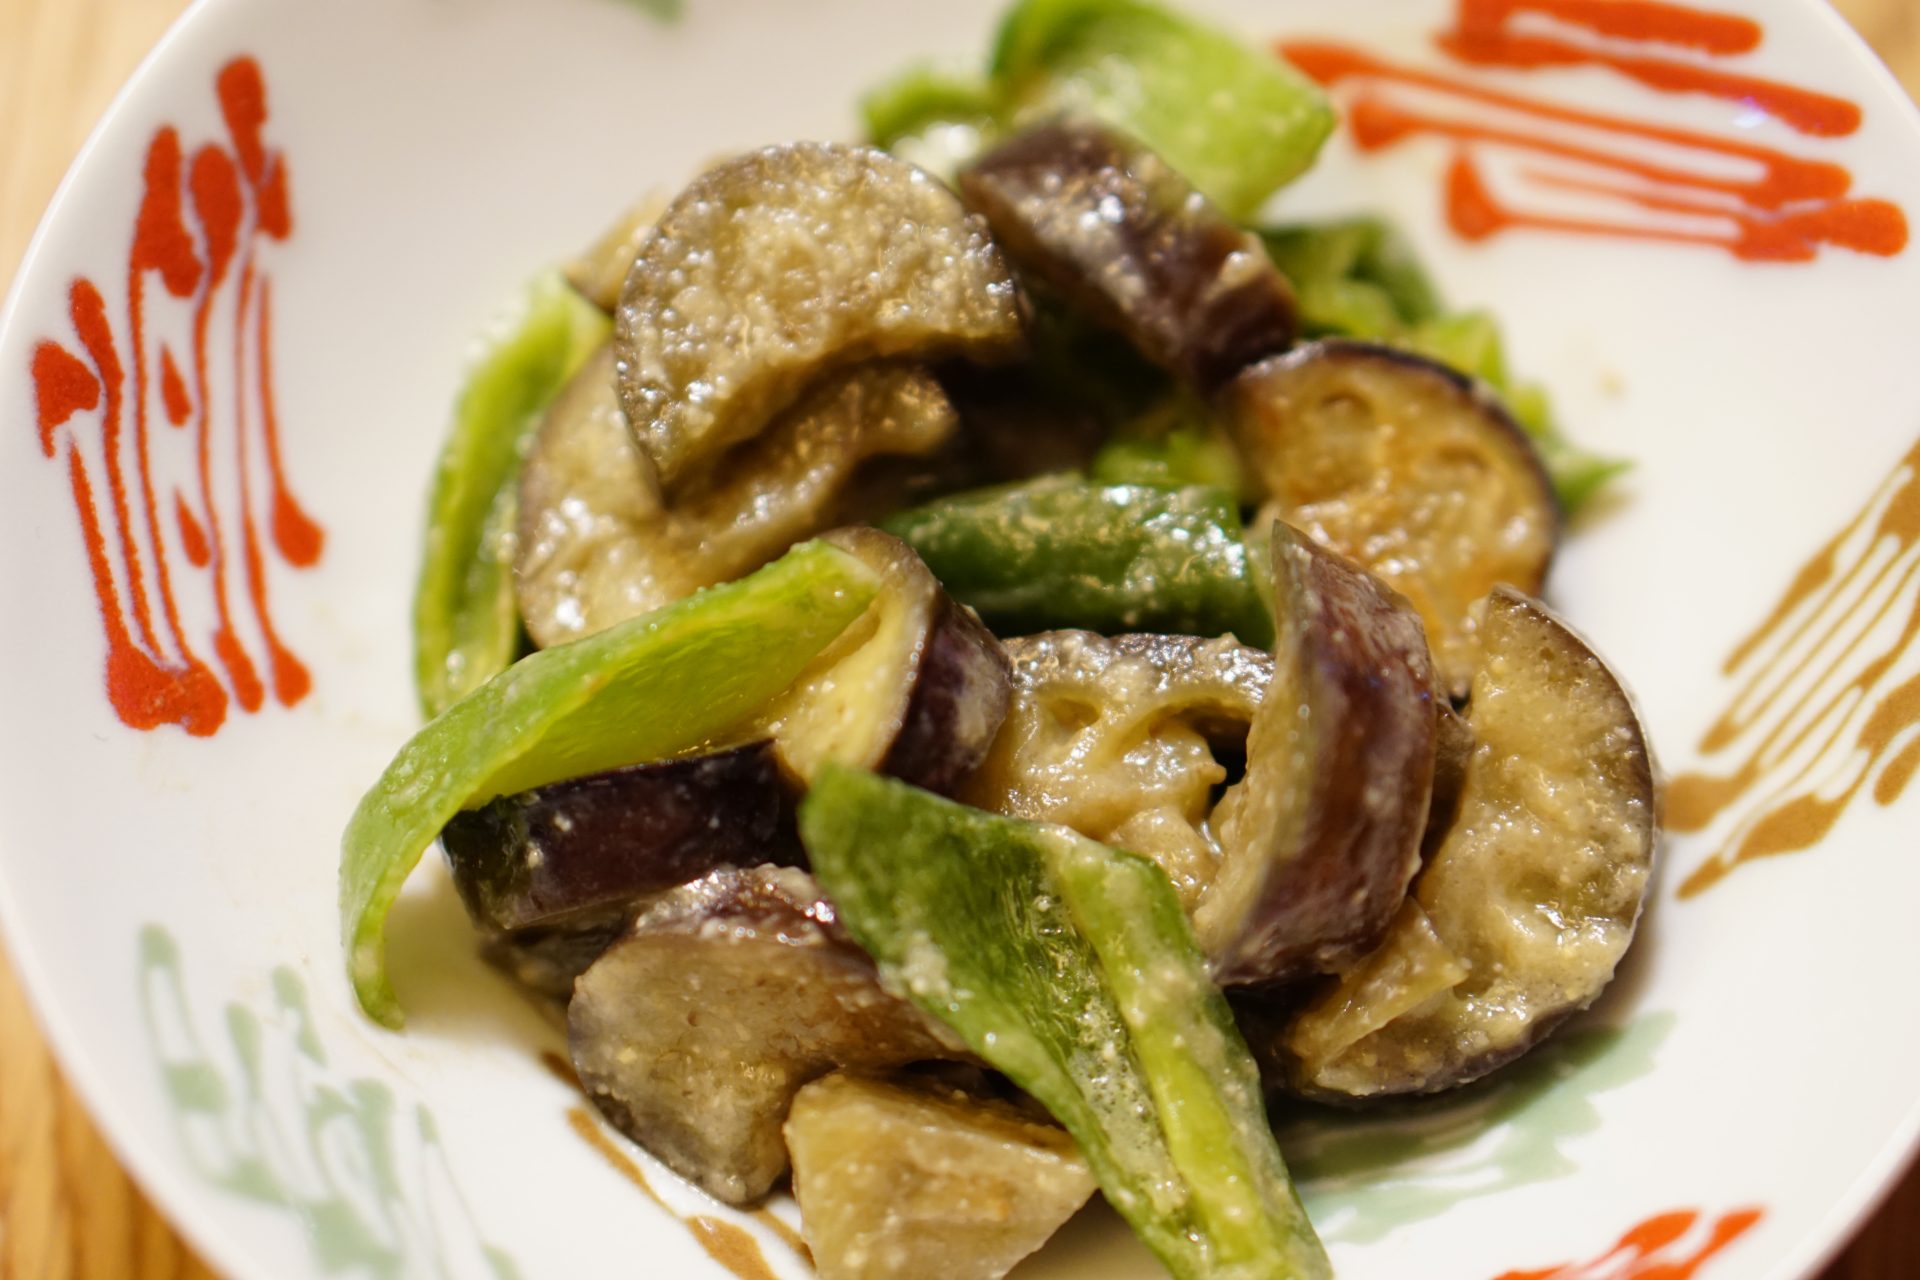 Sweet Miso-Braised Eggplant and Green Pepper - Preparation